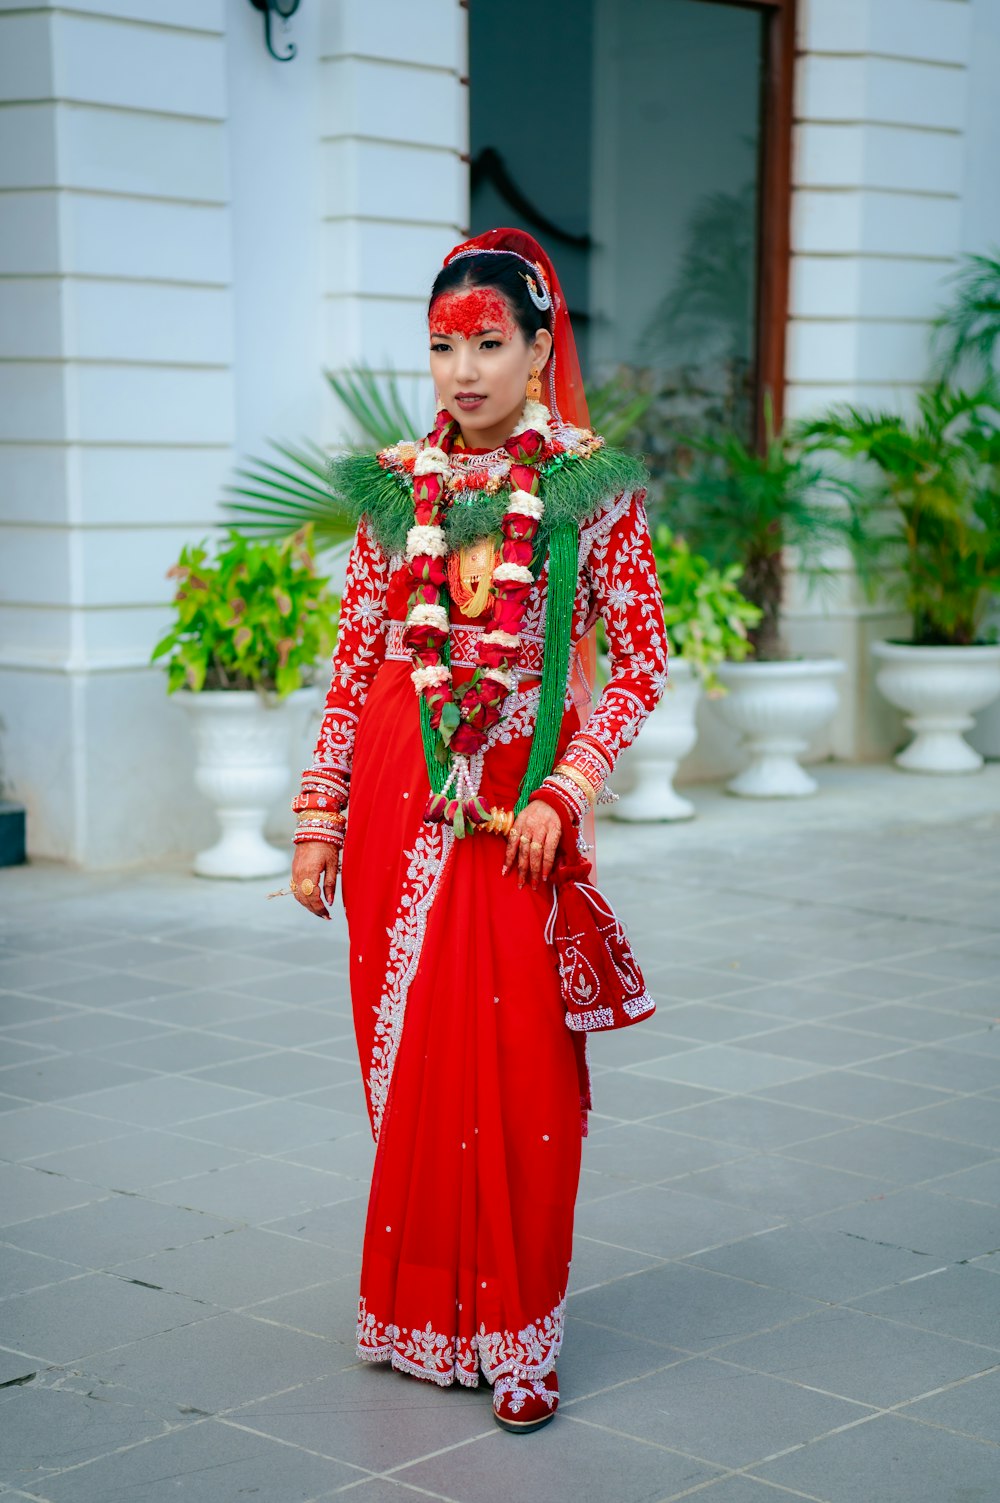 a woman dressed in a red and green outfit